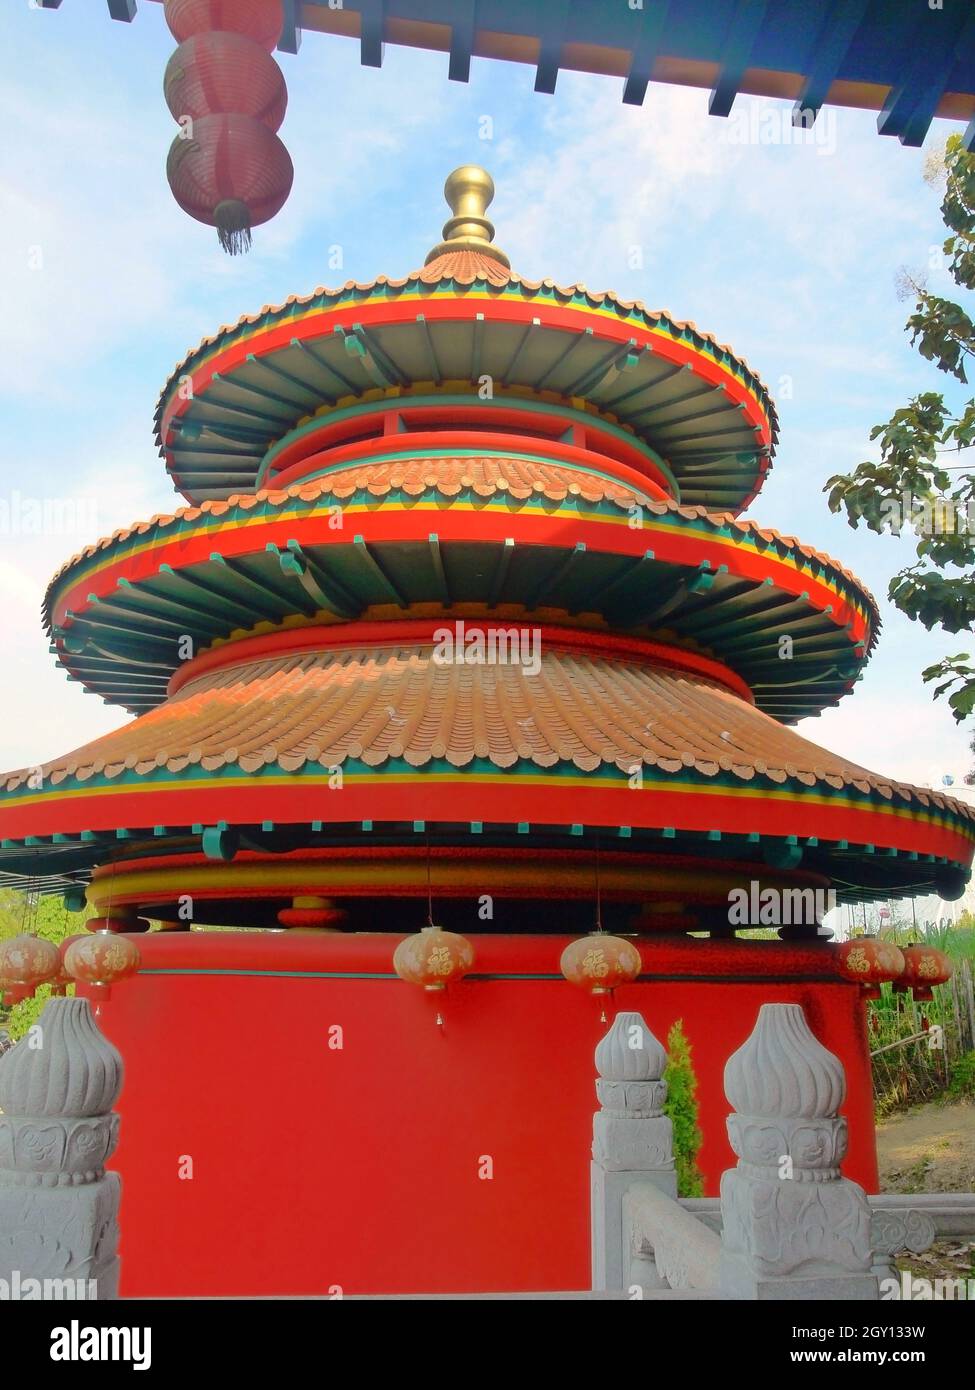 a temple with a red majority color in Jakarta, Indonesia Stock Photo